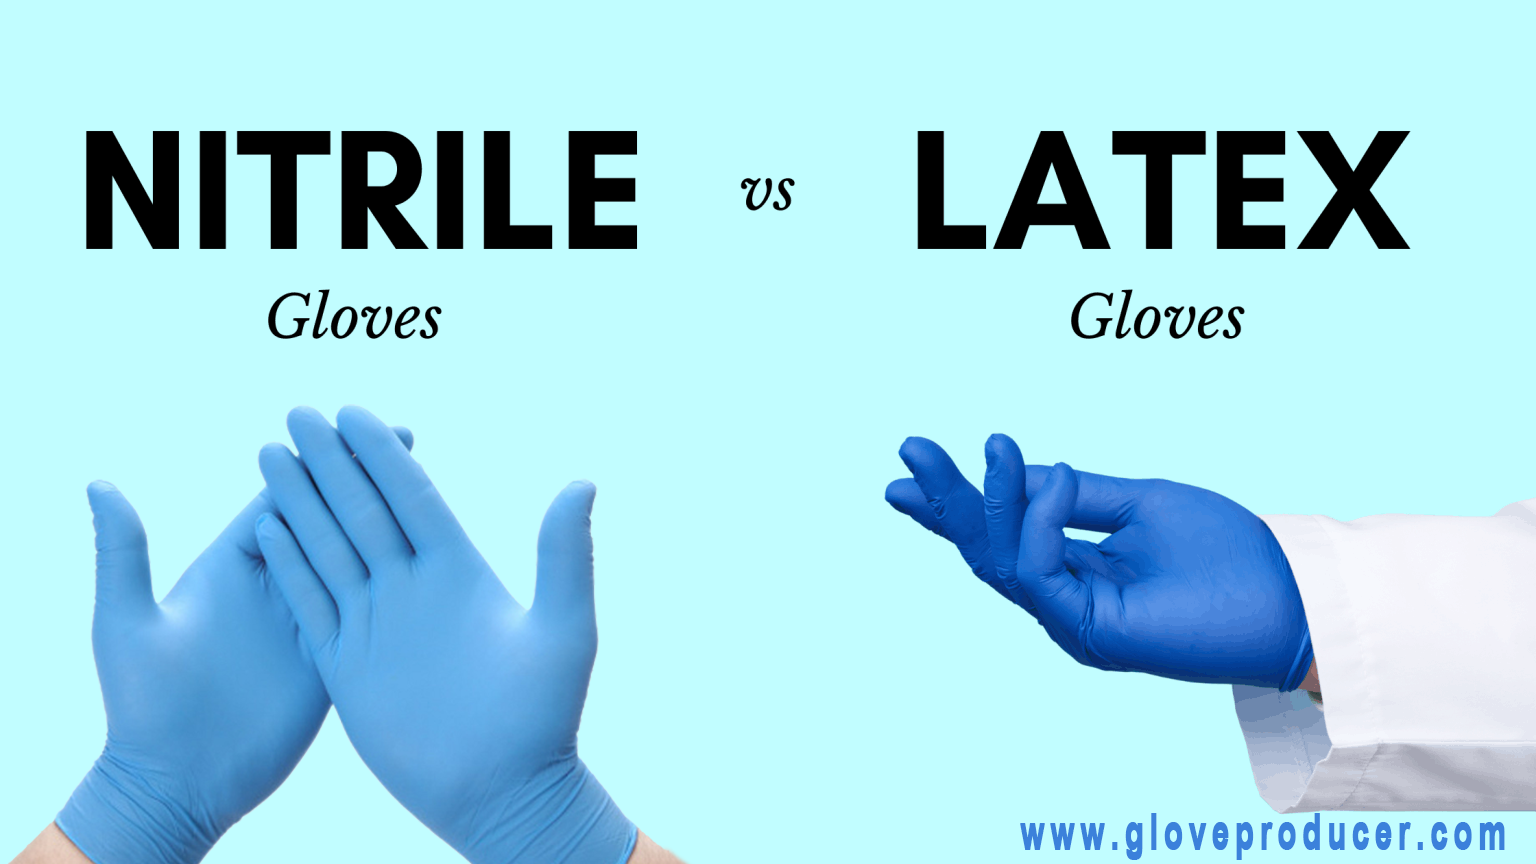 Nitrile Gloves vs Latex Gloves, which one better